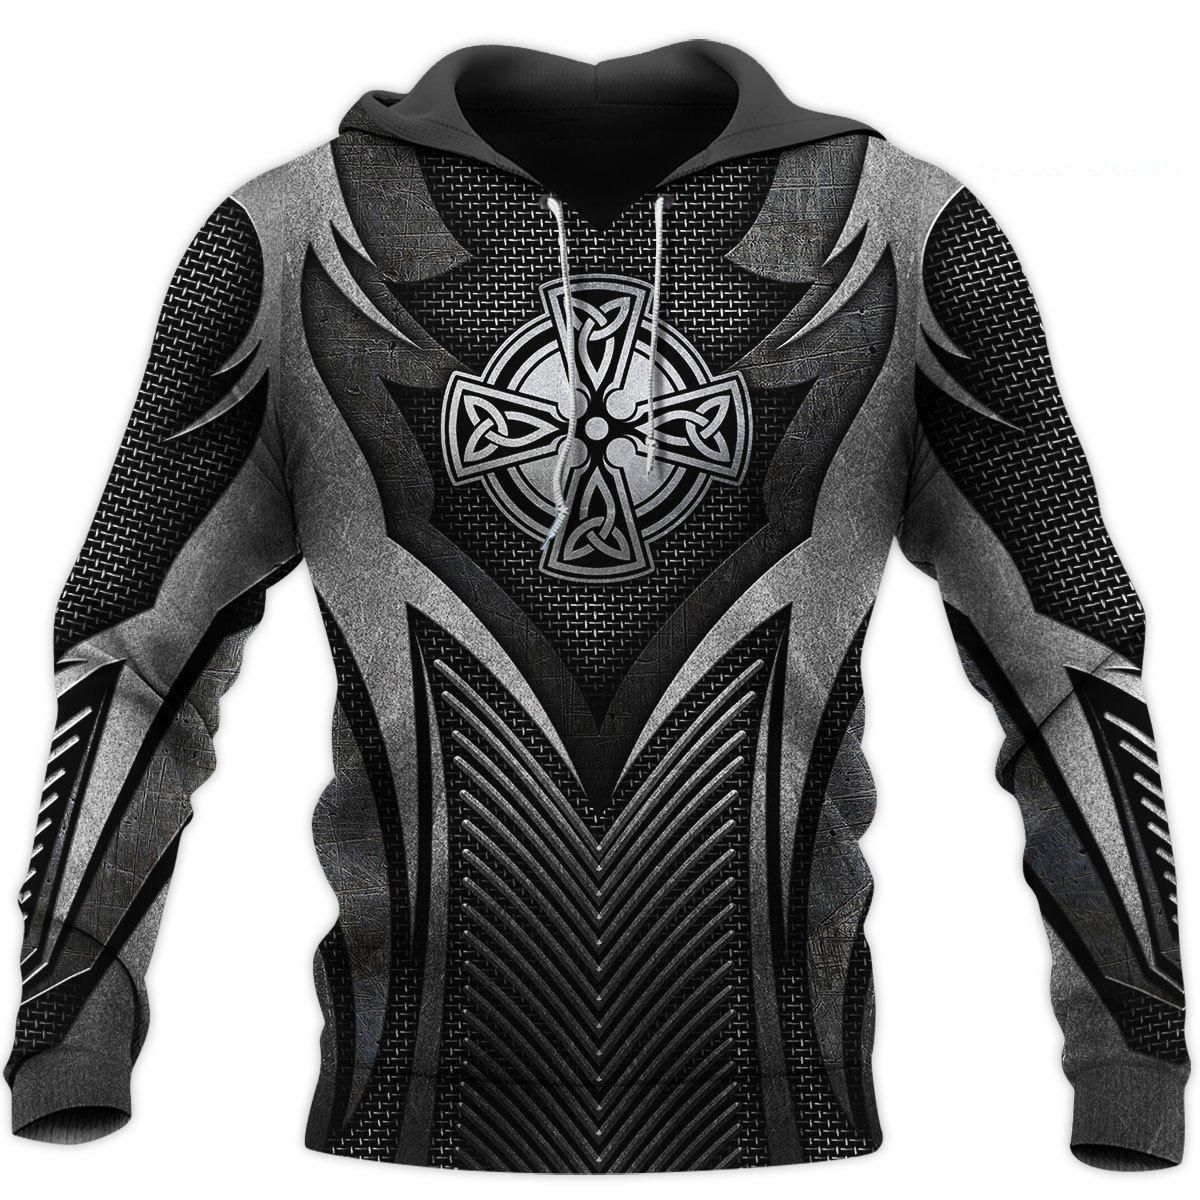 Irish Armor Warrior Chainmail 3D All Over Printed Shirts For Men And Women Tt280206